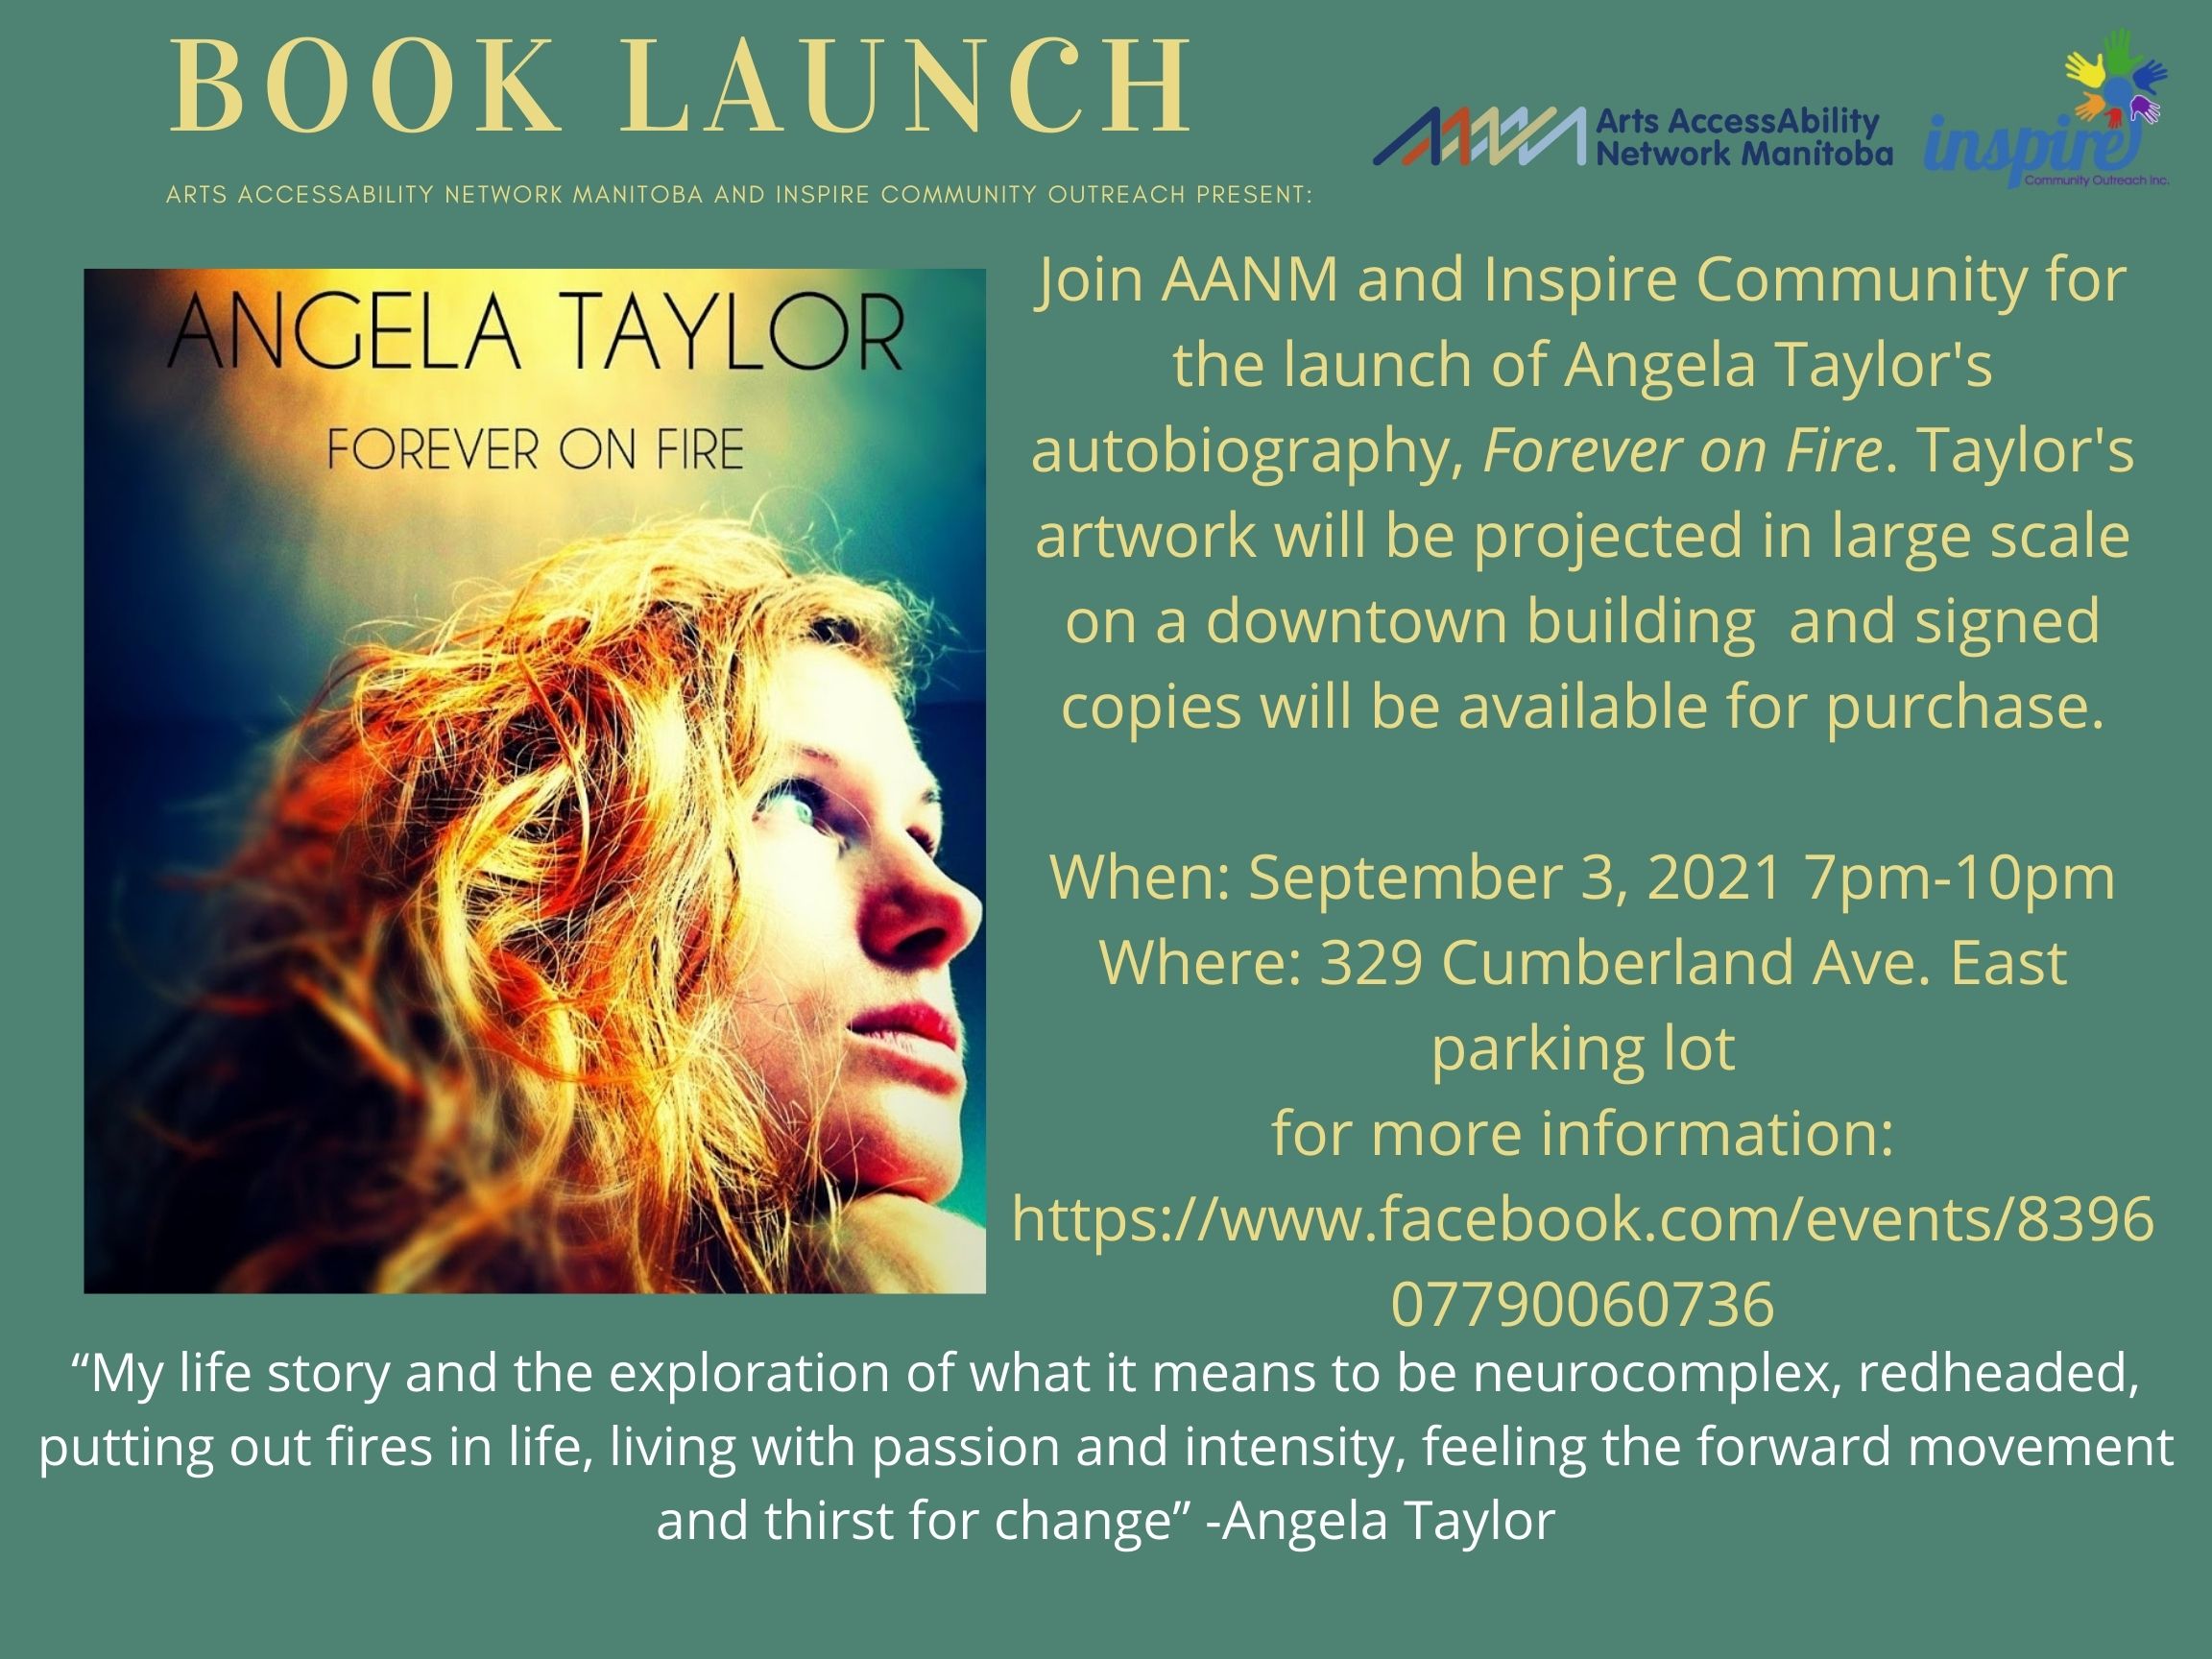 The background of the poster is sage green. All text is light yellow unless otherwise specified. On the upper left corner is large text that says “Book Launch”. Below in smaller text that says “Arts AccessAbility Network Manitoba and Inspire Community Outreach Present:”. In the upper right corner are AANM’s and Inspire Community’s logos. Taking up the majority of the left-hand side of the poster is an image of the book cover. The book cover has the words “ANGELA TAYLOR FOREVER ON FIRE” along the top with an head shot of Angela. Angela is a white woman with long bright red hair. Angela is looking to the right and is in ¾ profile. Next to the book cover on the right is the following text “Join AANM and Inspire Community for the launch of Angela Taylor's autobiography, Forever on Fire. Taylor's artwork will be projected in large scale on a downtown building and signed copies will be available for purchase. When: September 3, 2021 7pm-10pm Where: 329 Cumberland Ave. East parking lot. for more information: https://www.facebook.com/events/839607790060736”. Below this text and the book cover is a quote by Angela in white text ““My life story and the exploration of what it means to be neurocomplex, redheaded, putting out fires in life, living with passion and intensity, feeling the forward movement and thirst for change” -Angela Taylor”